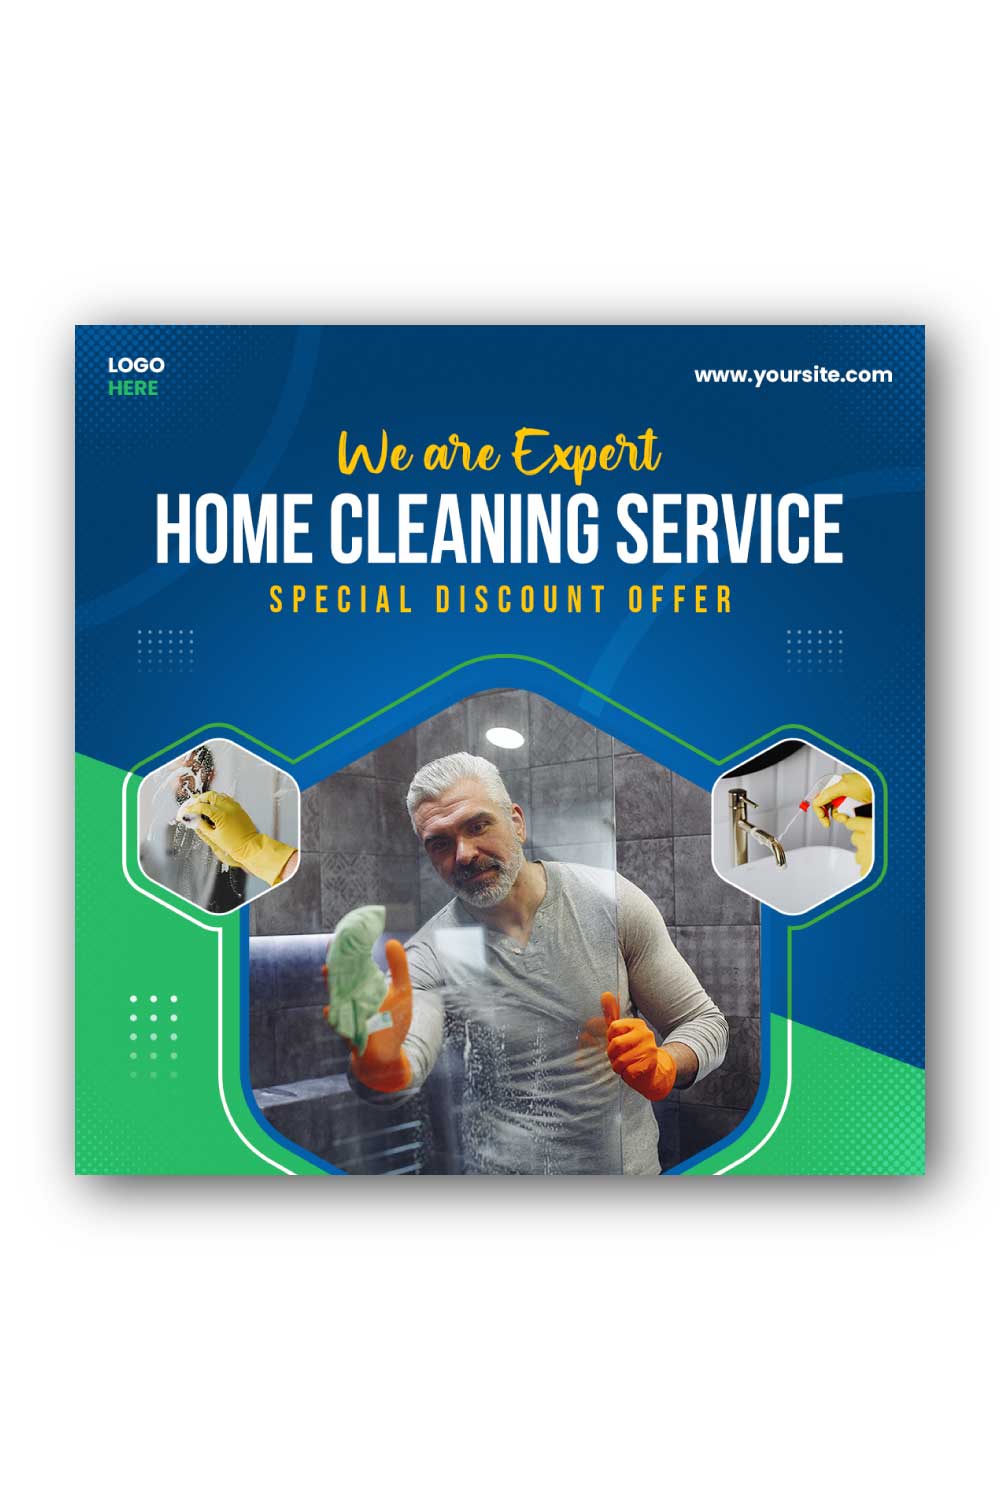 Home cleaning service Social Media Template pinterest preview image.